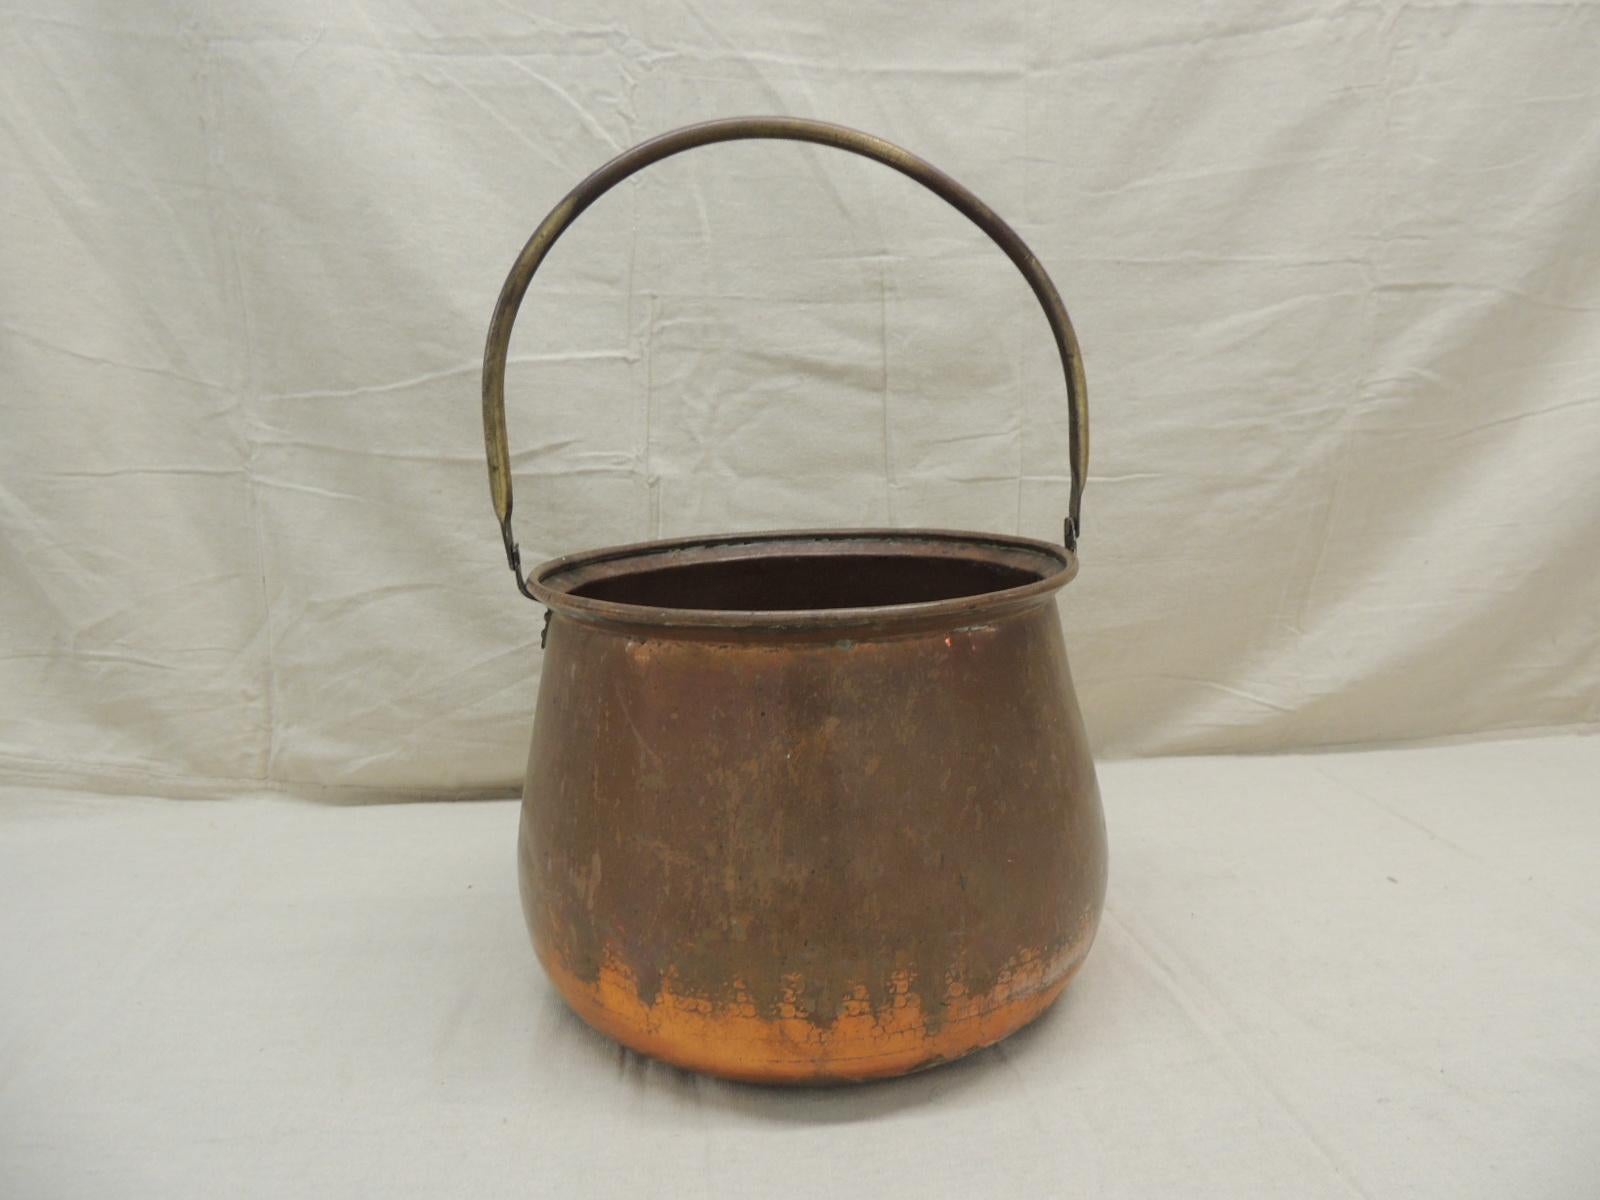 Large round copper and brass handle cauldron or log holder.
Measures: 13” D x 19” H (to the top of the handle).
   